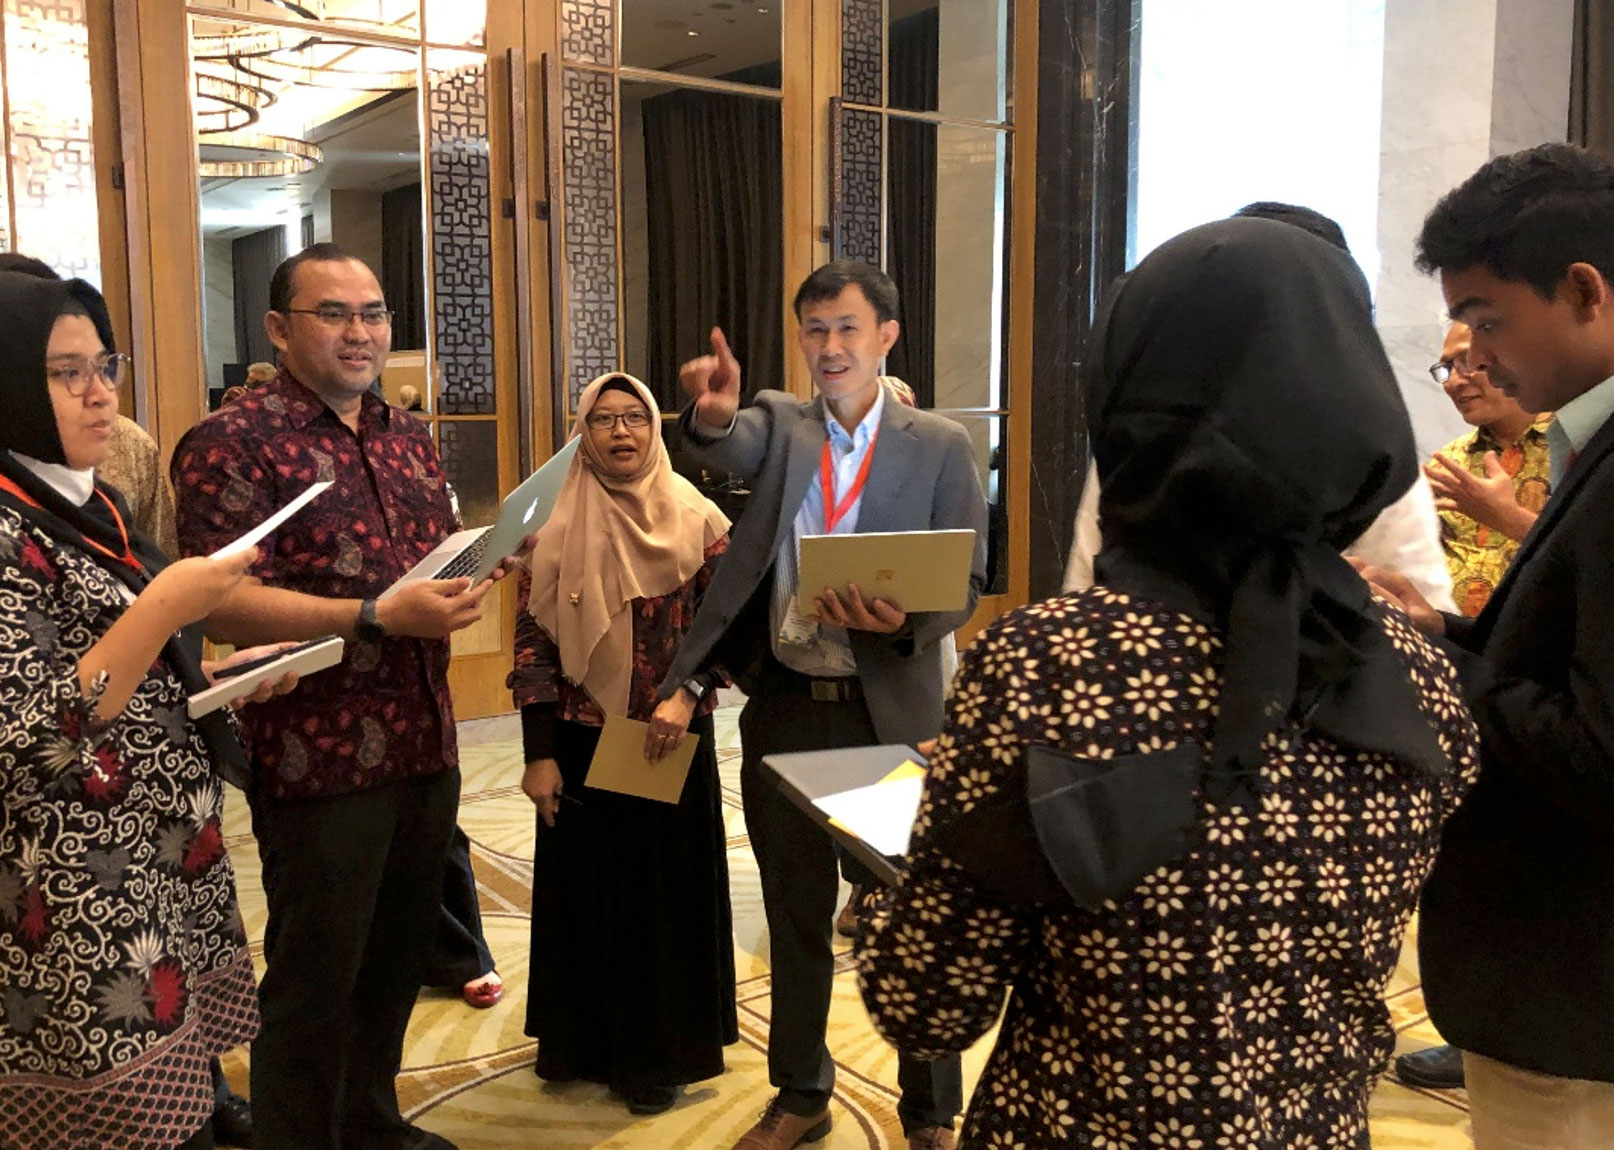 Participants discussed key topics like addressing loss and damage, implementing international carbon market regulations (Article 6), and recognising forests' multifaceted roles towards sustainability.